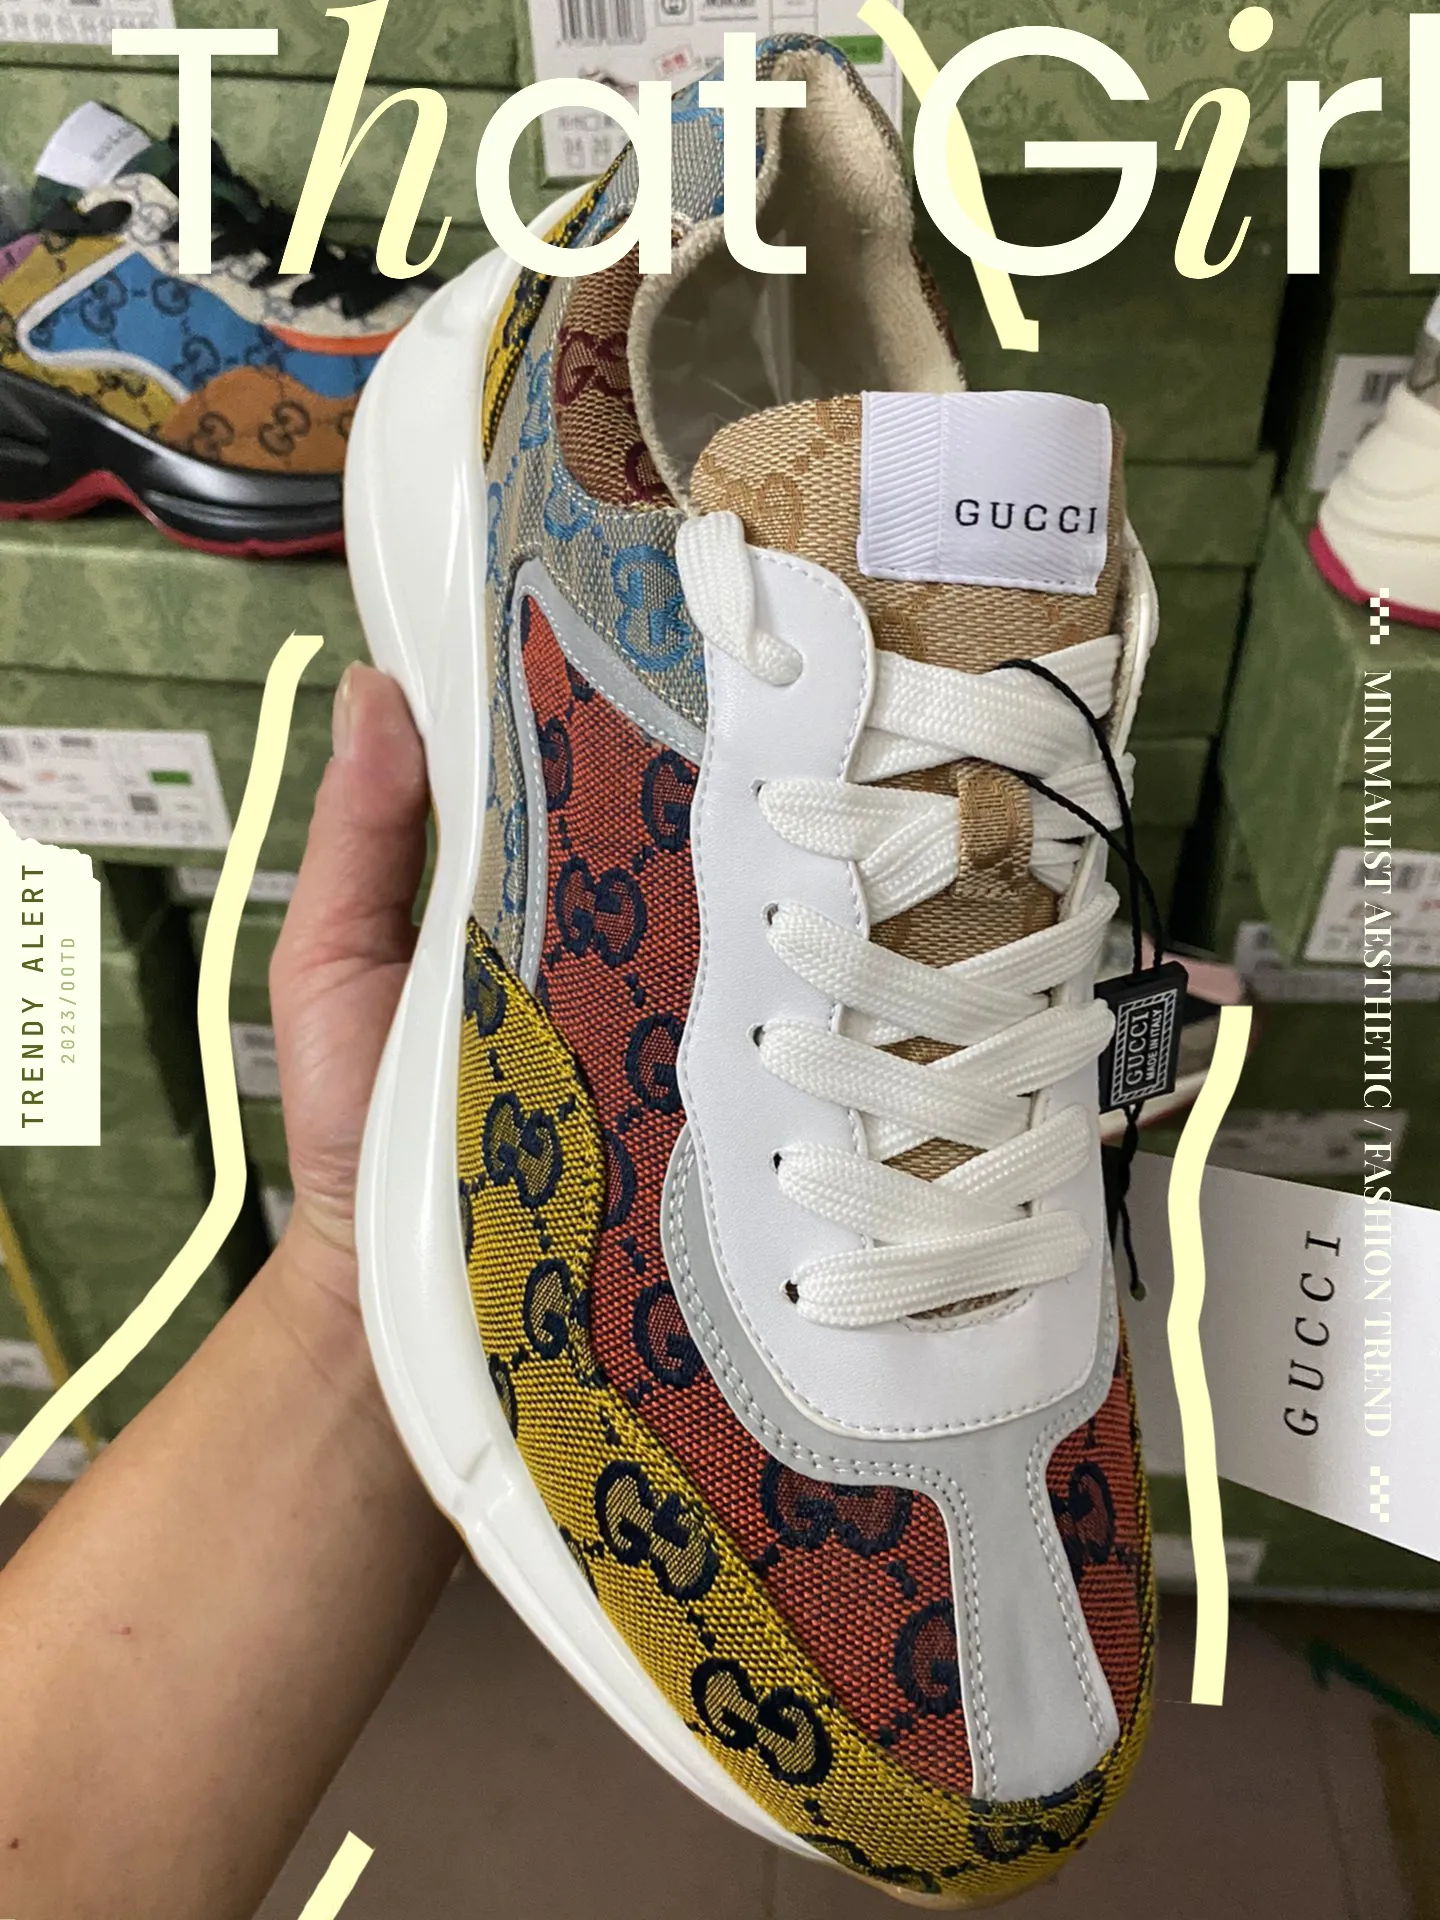 gucci sneakers outfit - Lemon8 Search